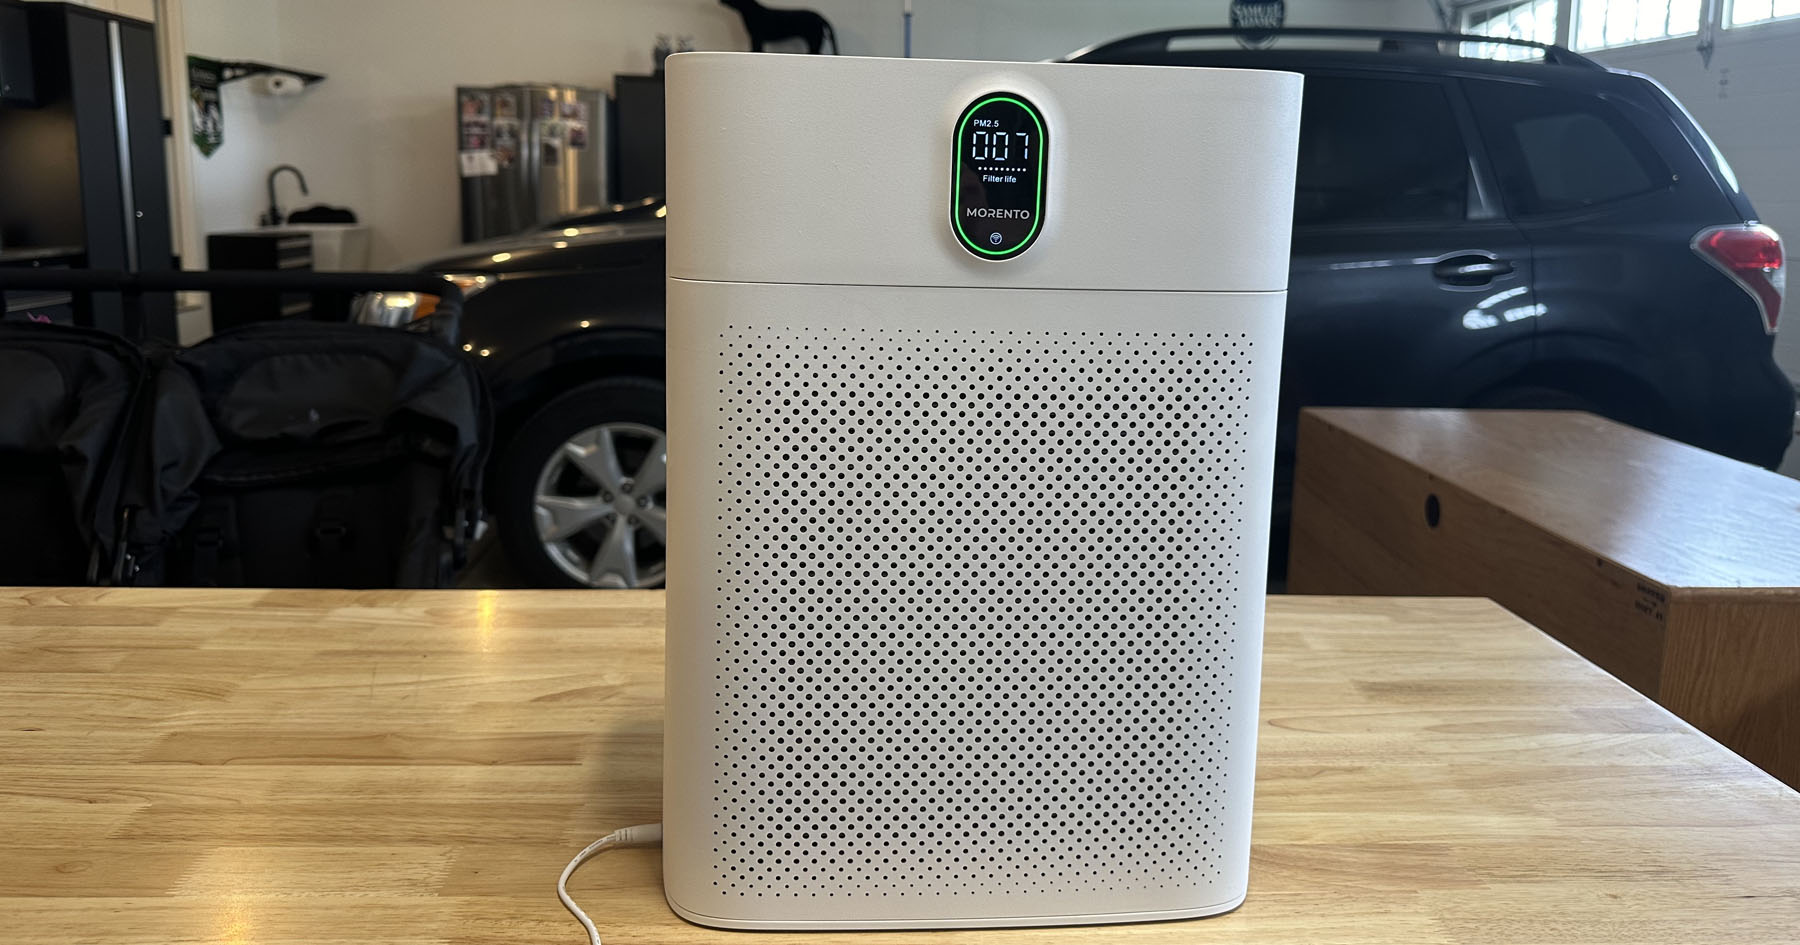 morento smart air purifier on a wooden table in a garage